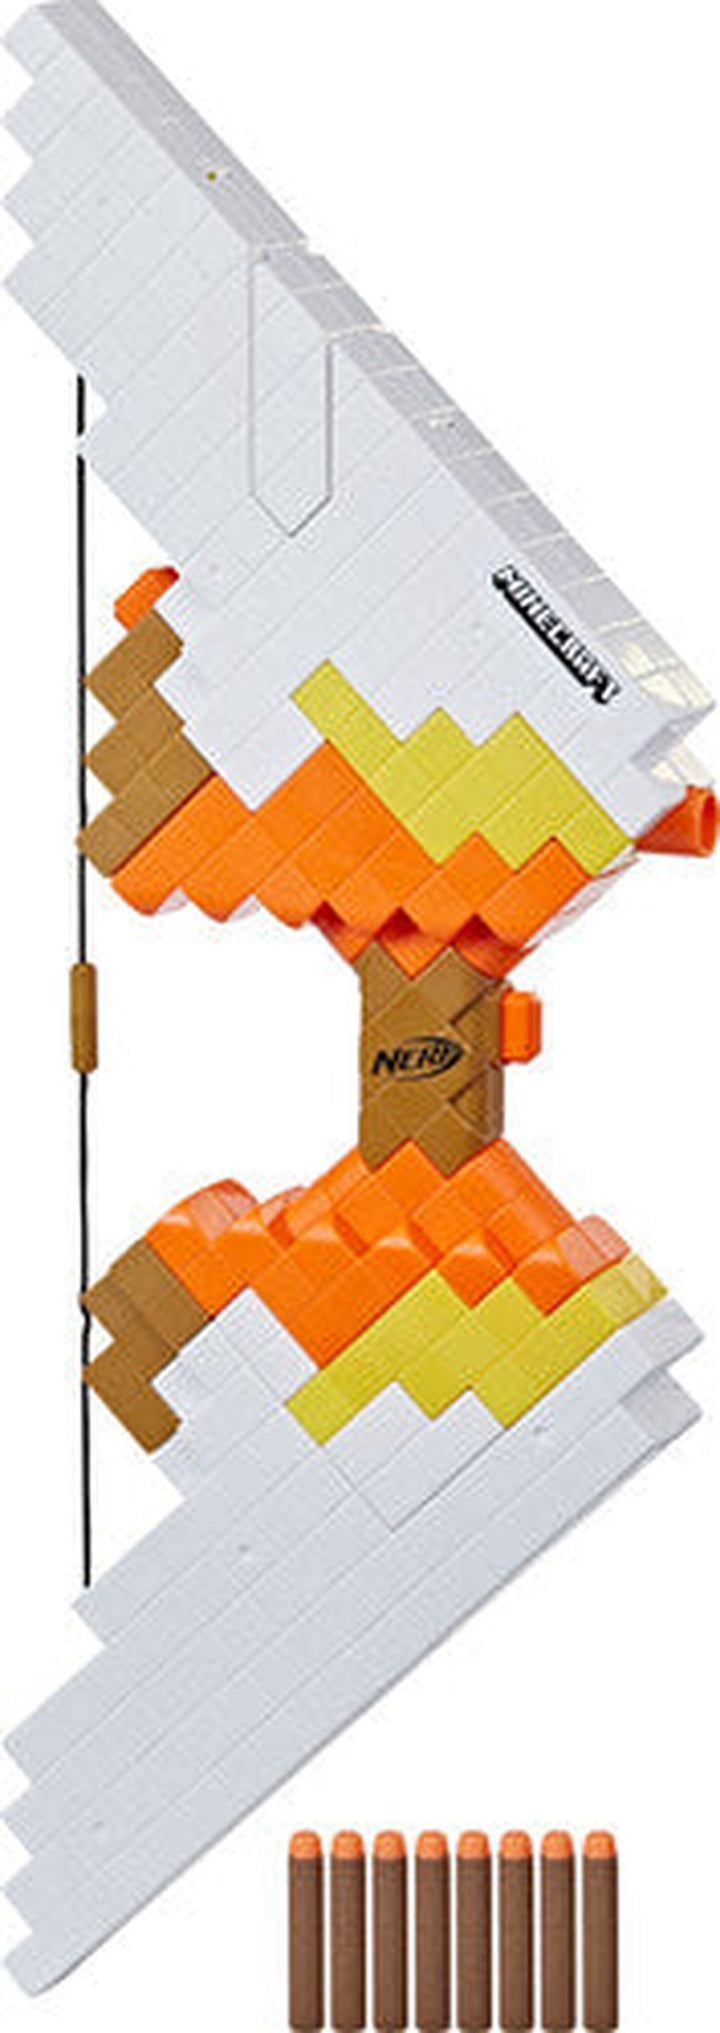 Hasbro Collectibles - Nerf Minecraft Sabrewing